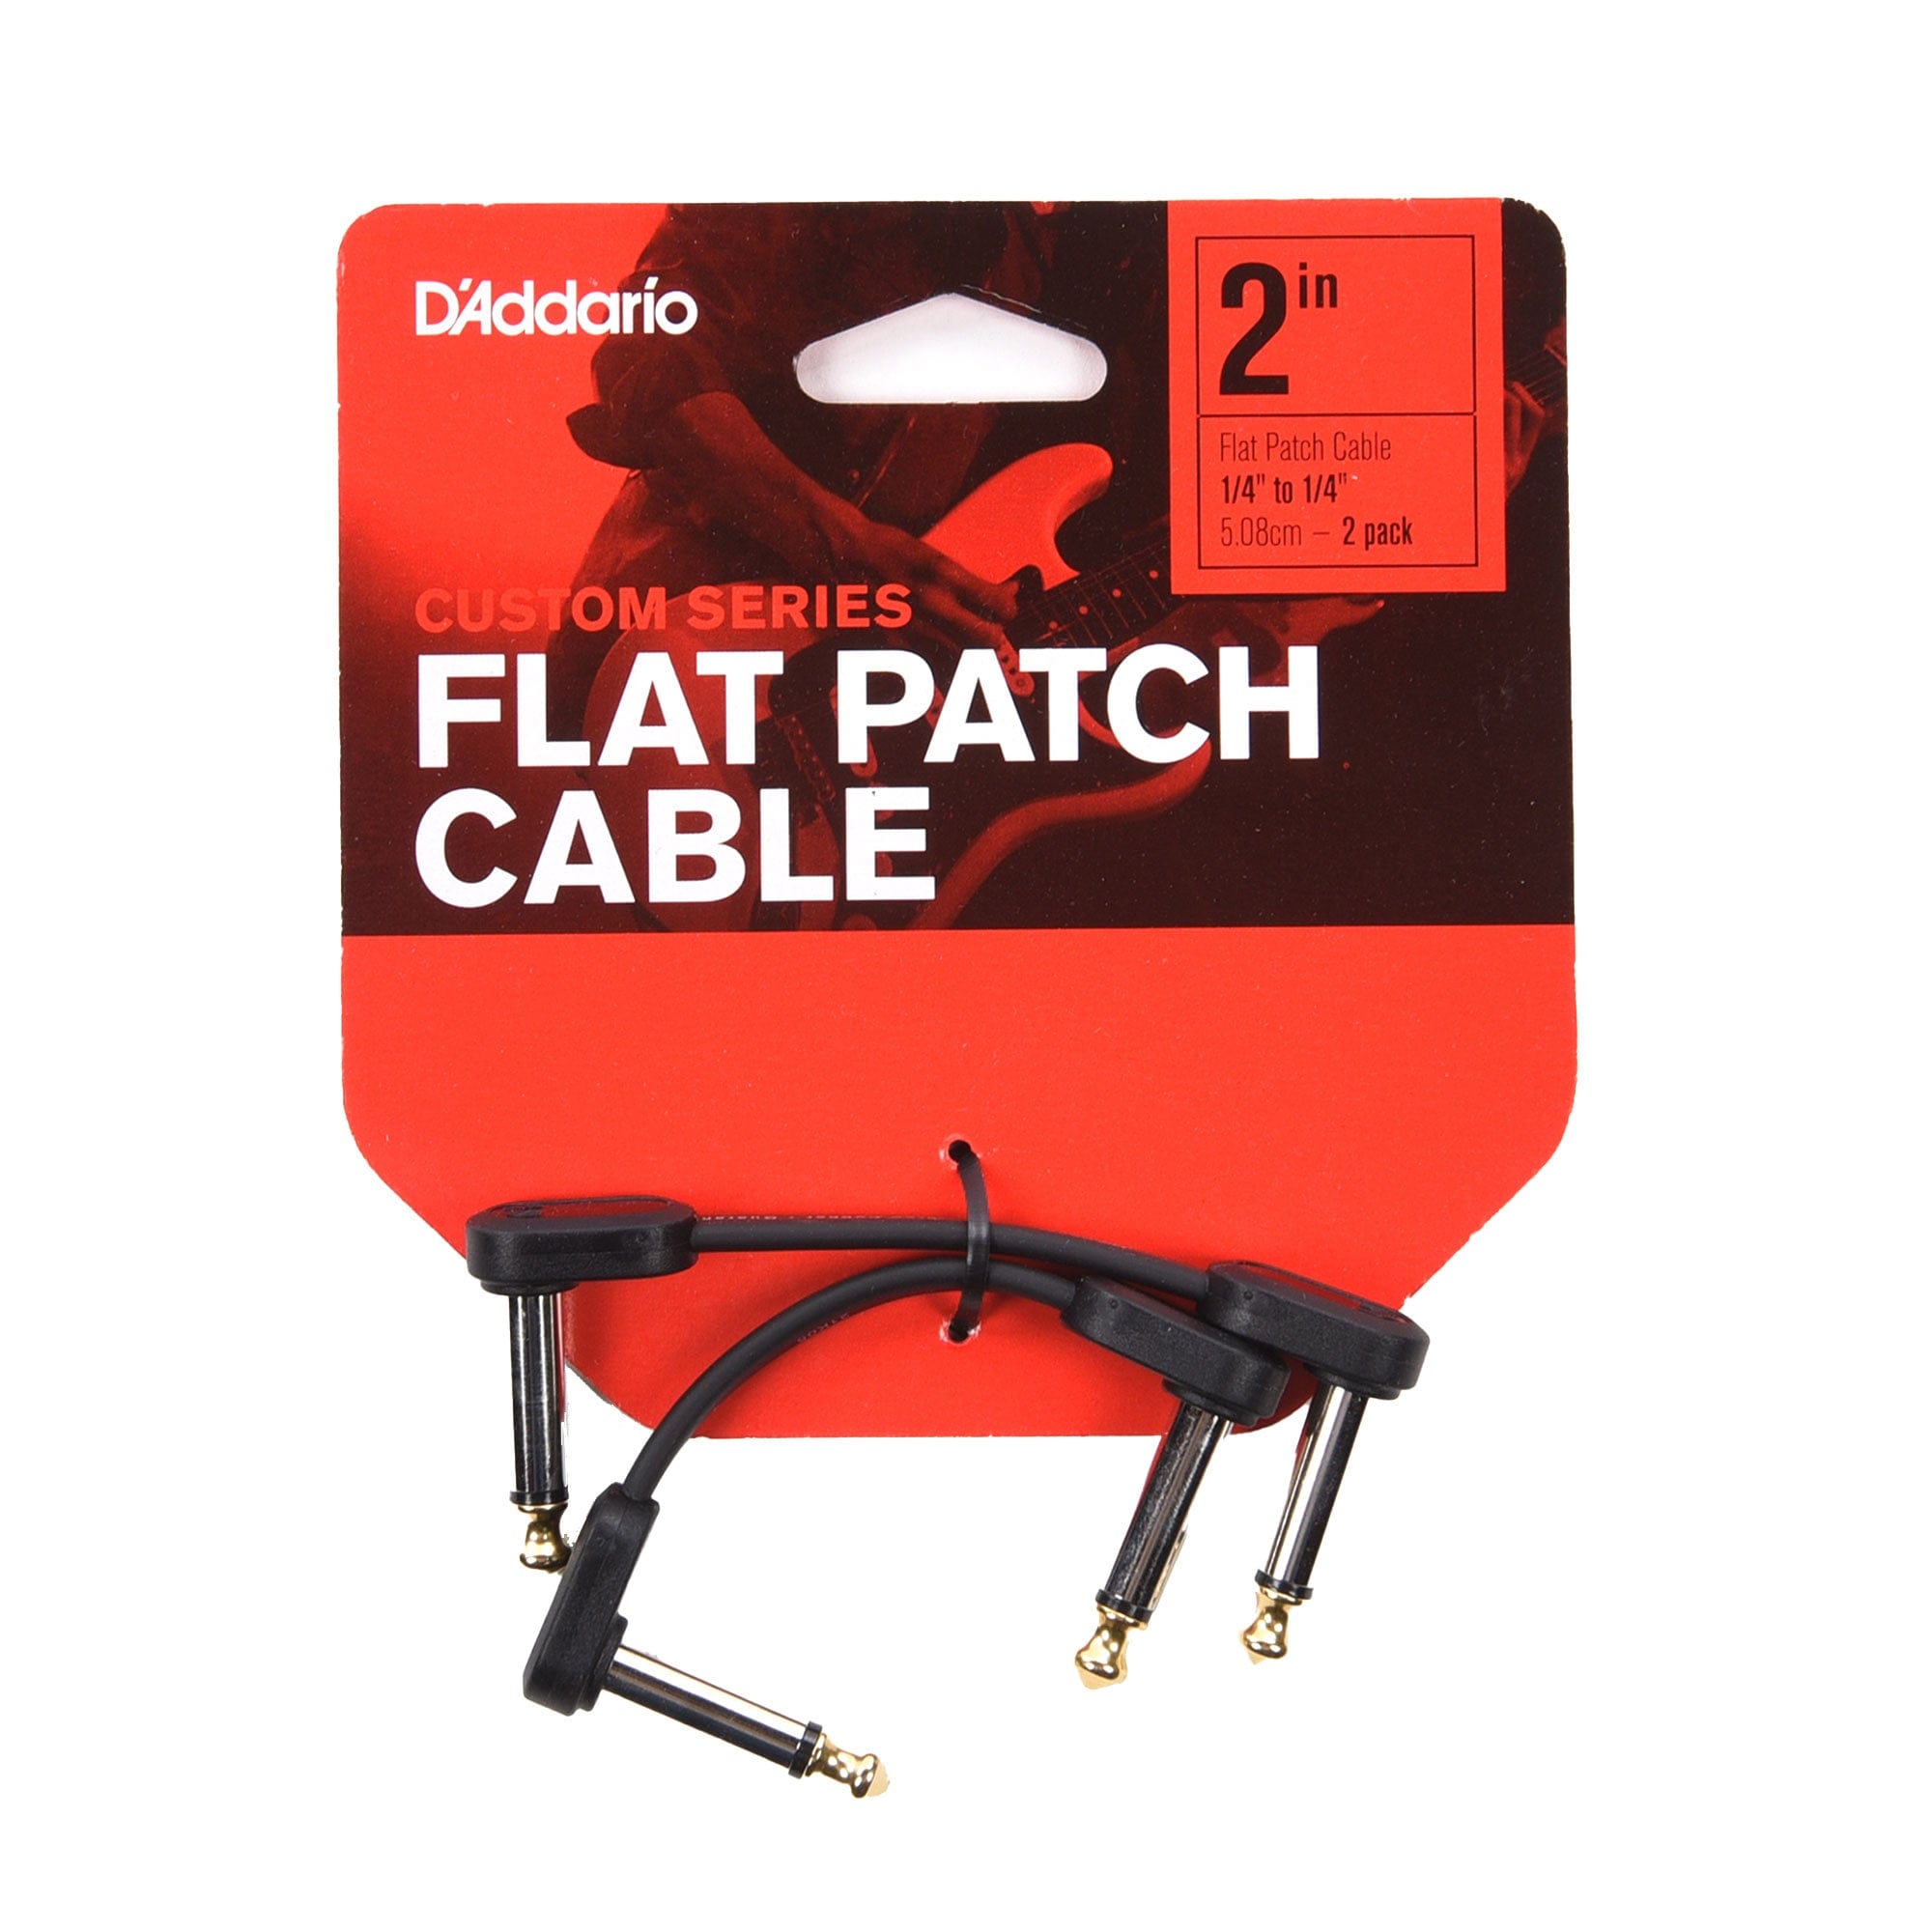 D'Addario Flat Patch Cable 2